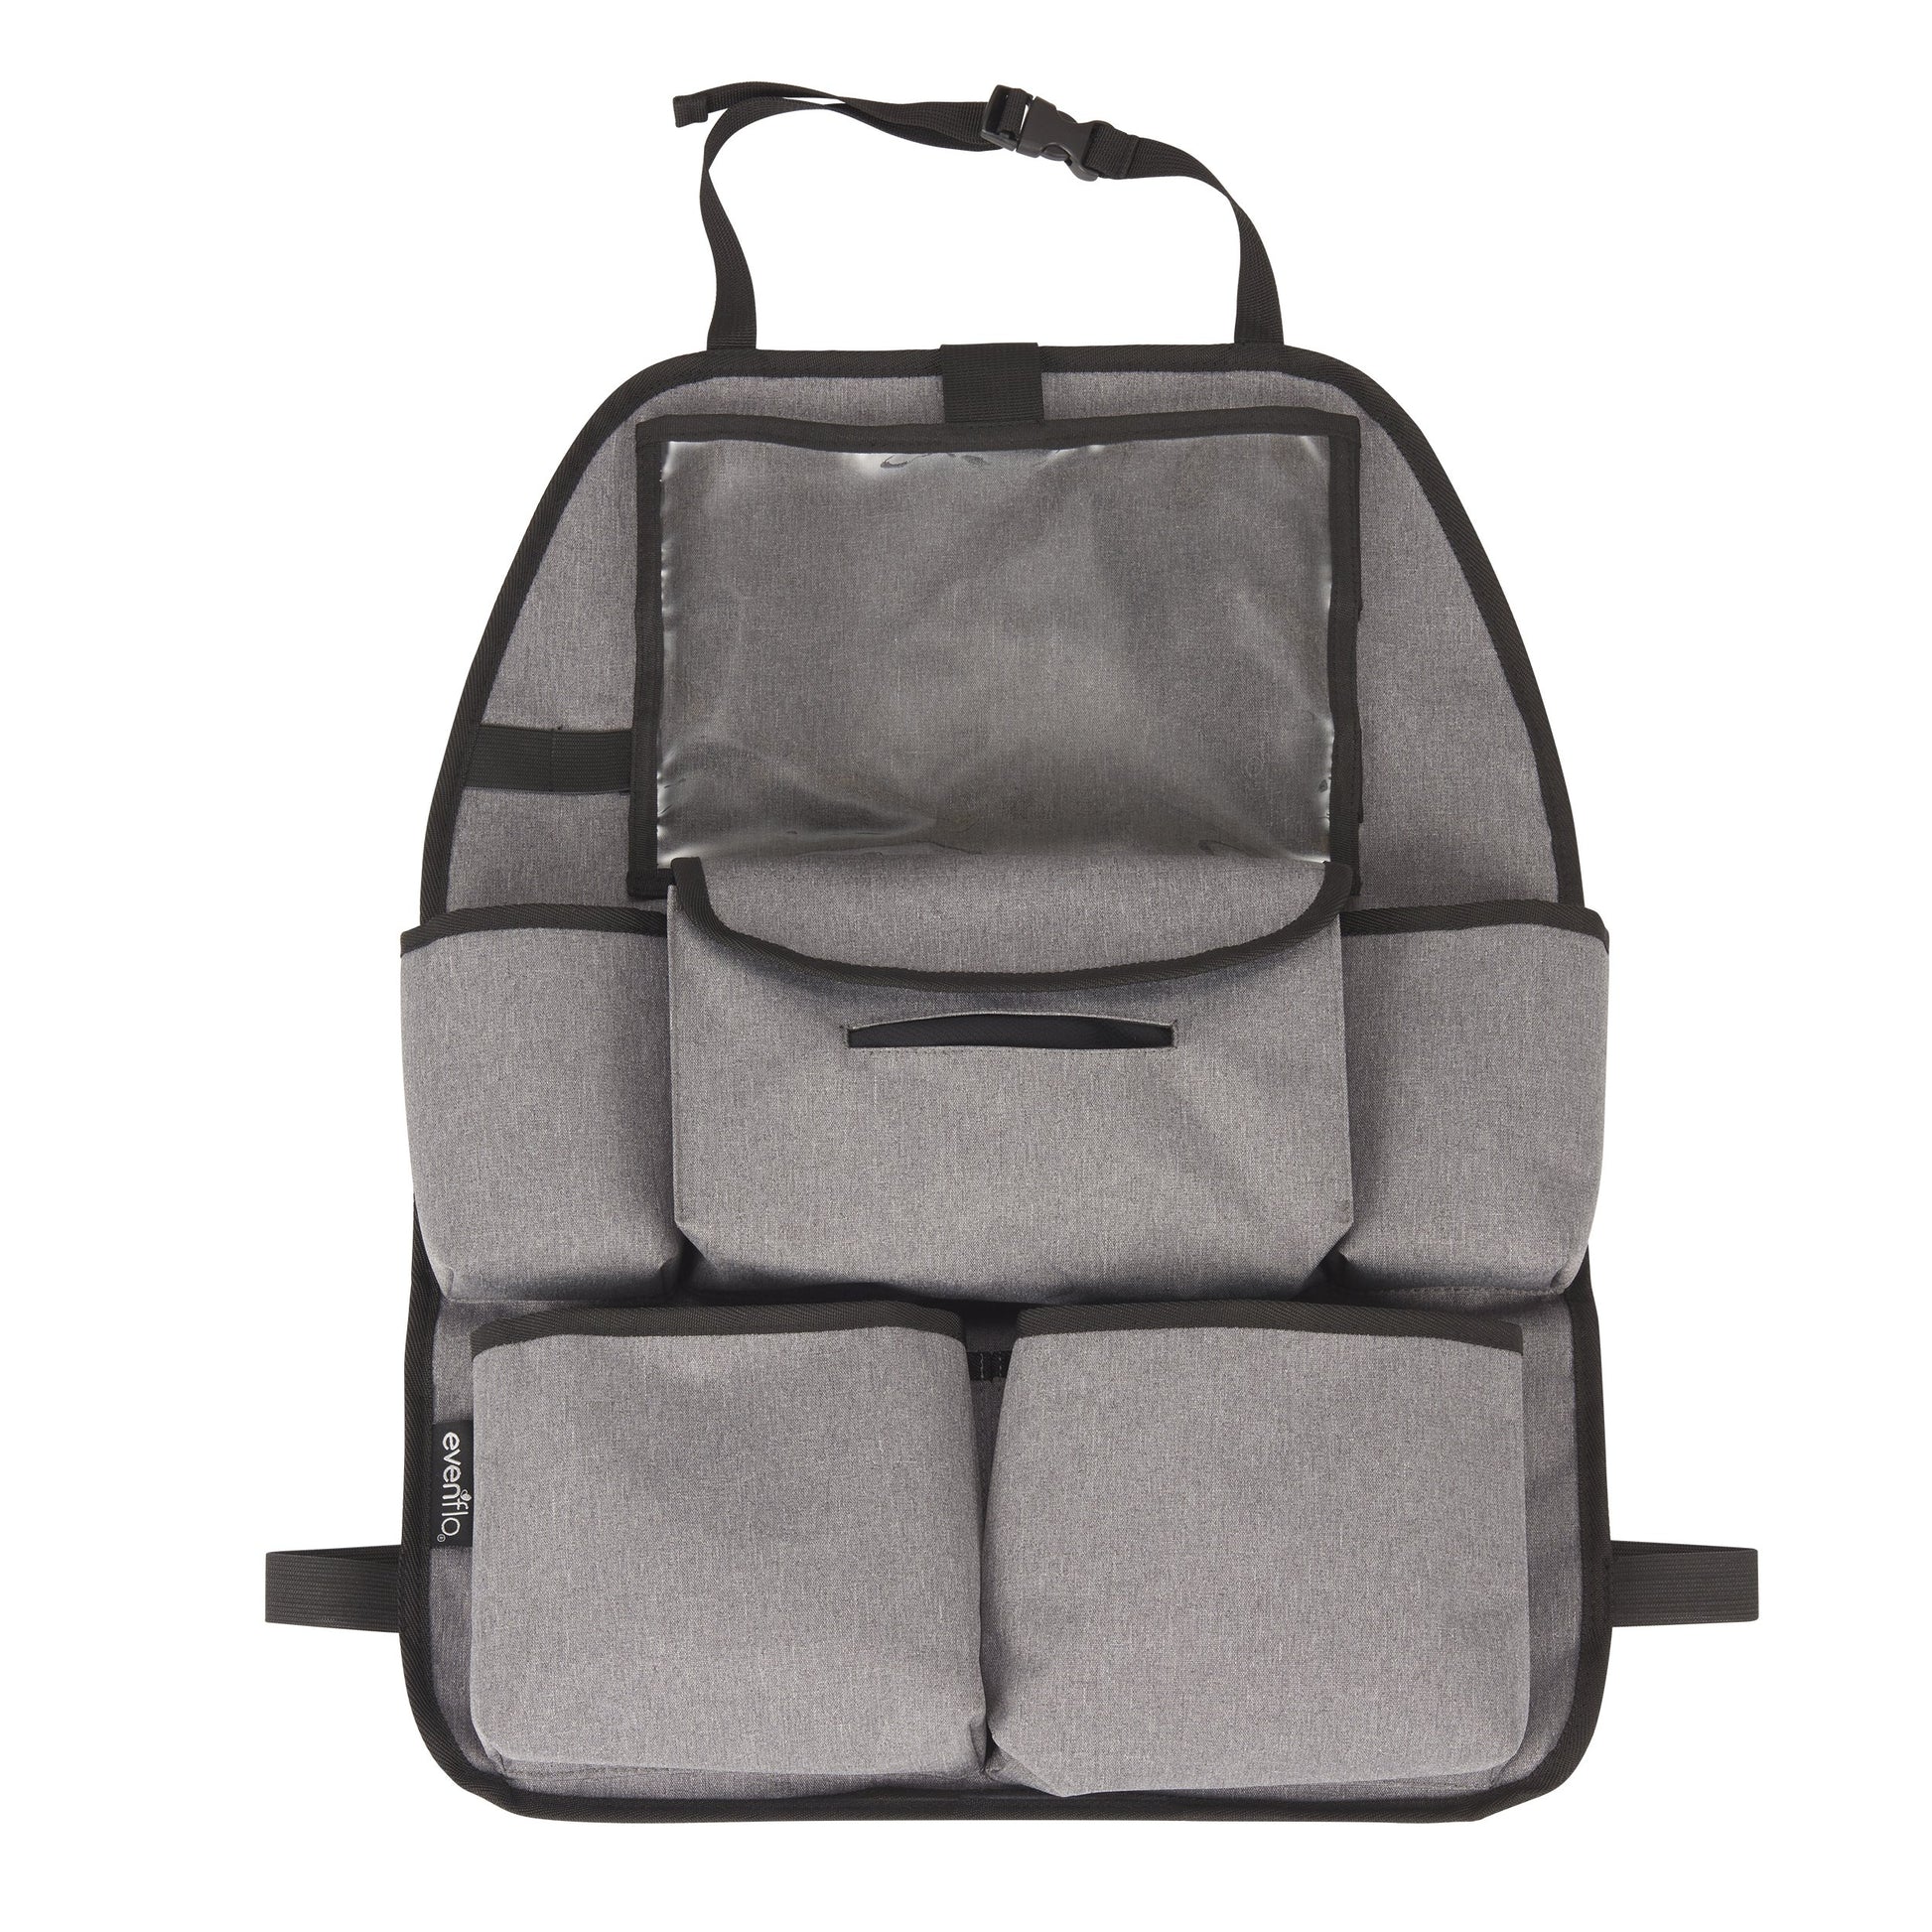 Deluxe Backseat Car Organizer With Pocket